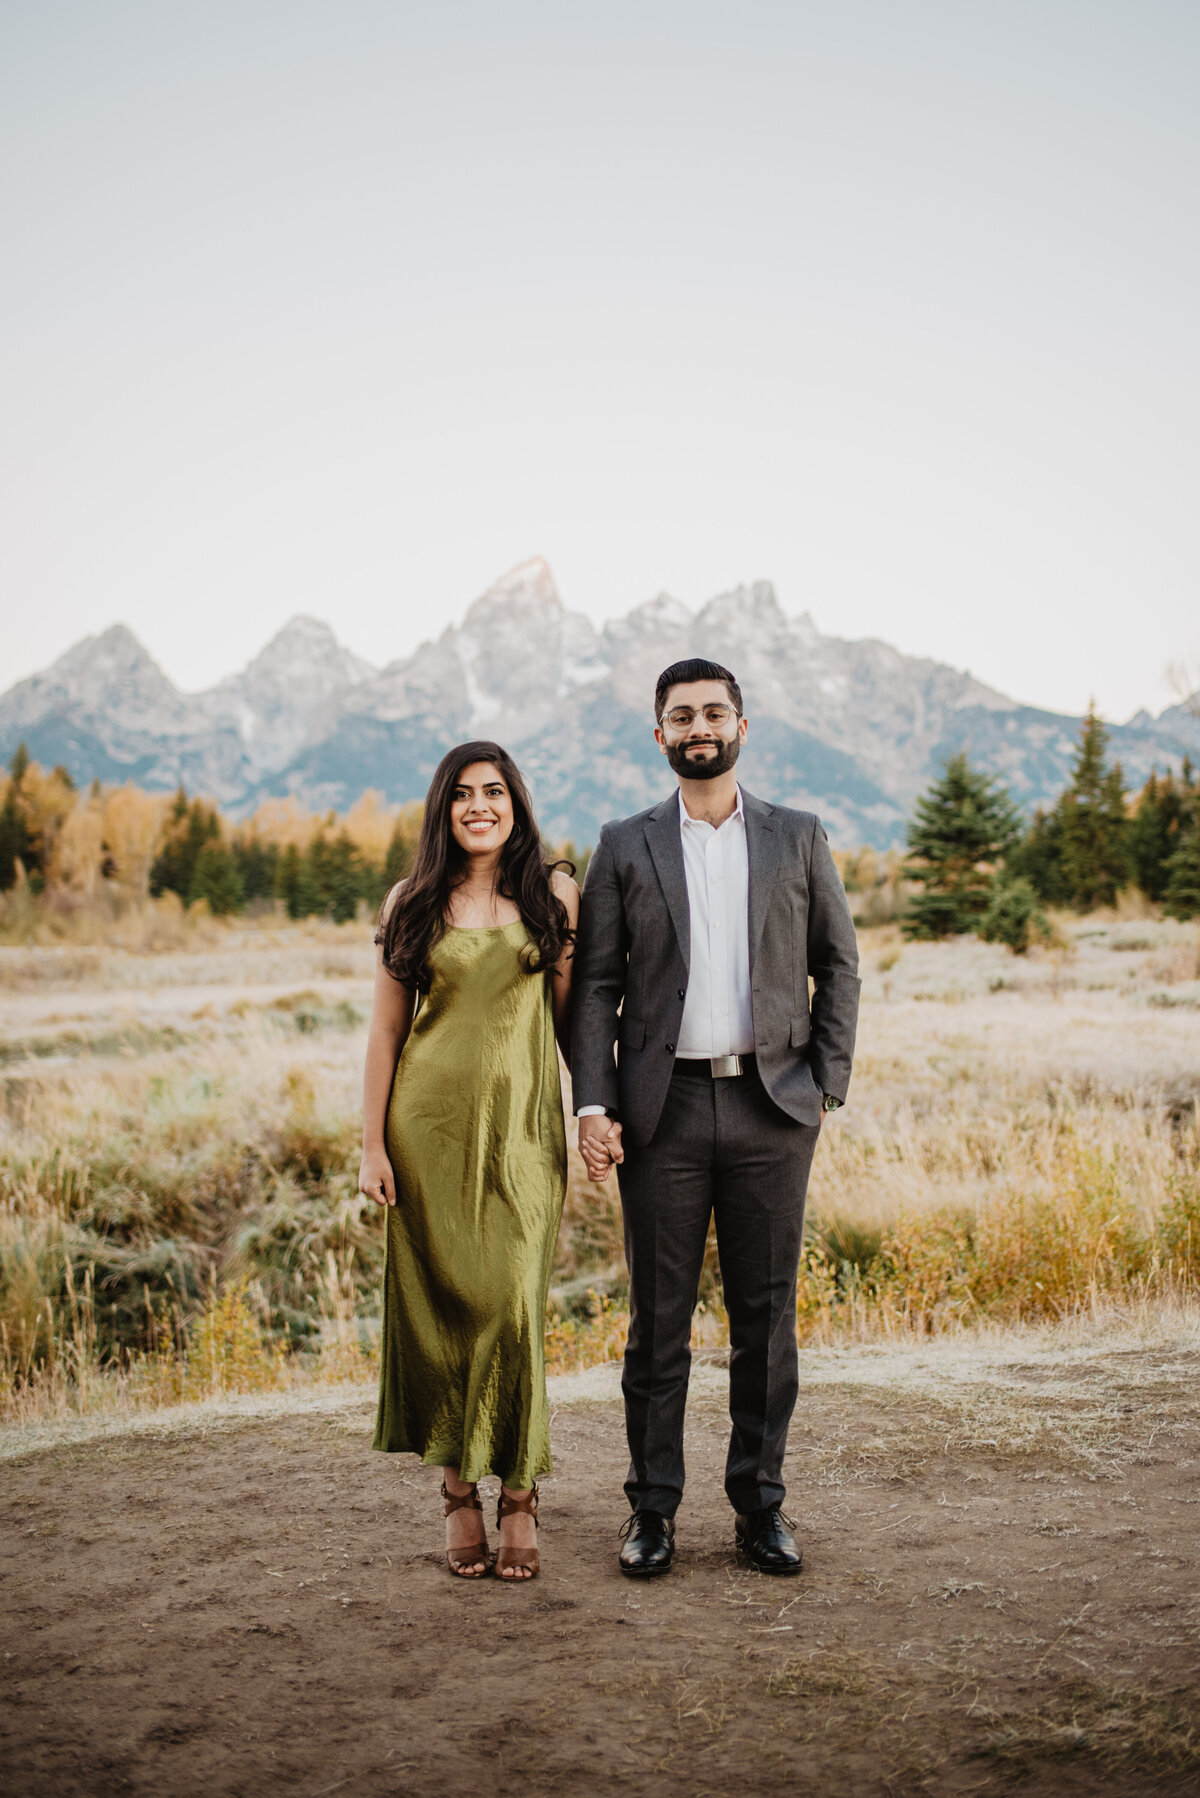 photographers in jackson hole photographs formal engagement session in Jackson Hole during the fall with man and woman holding hands in front of the Gran dTetons, man in suit and woman in velvet dress